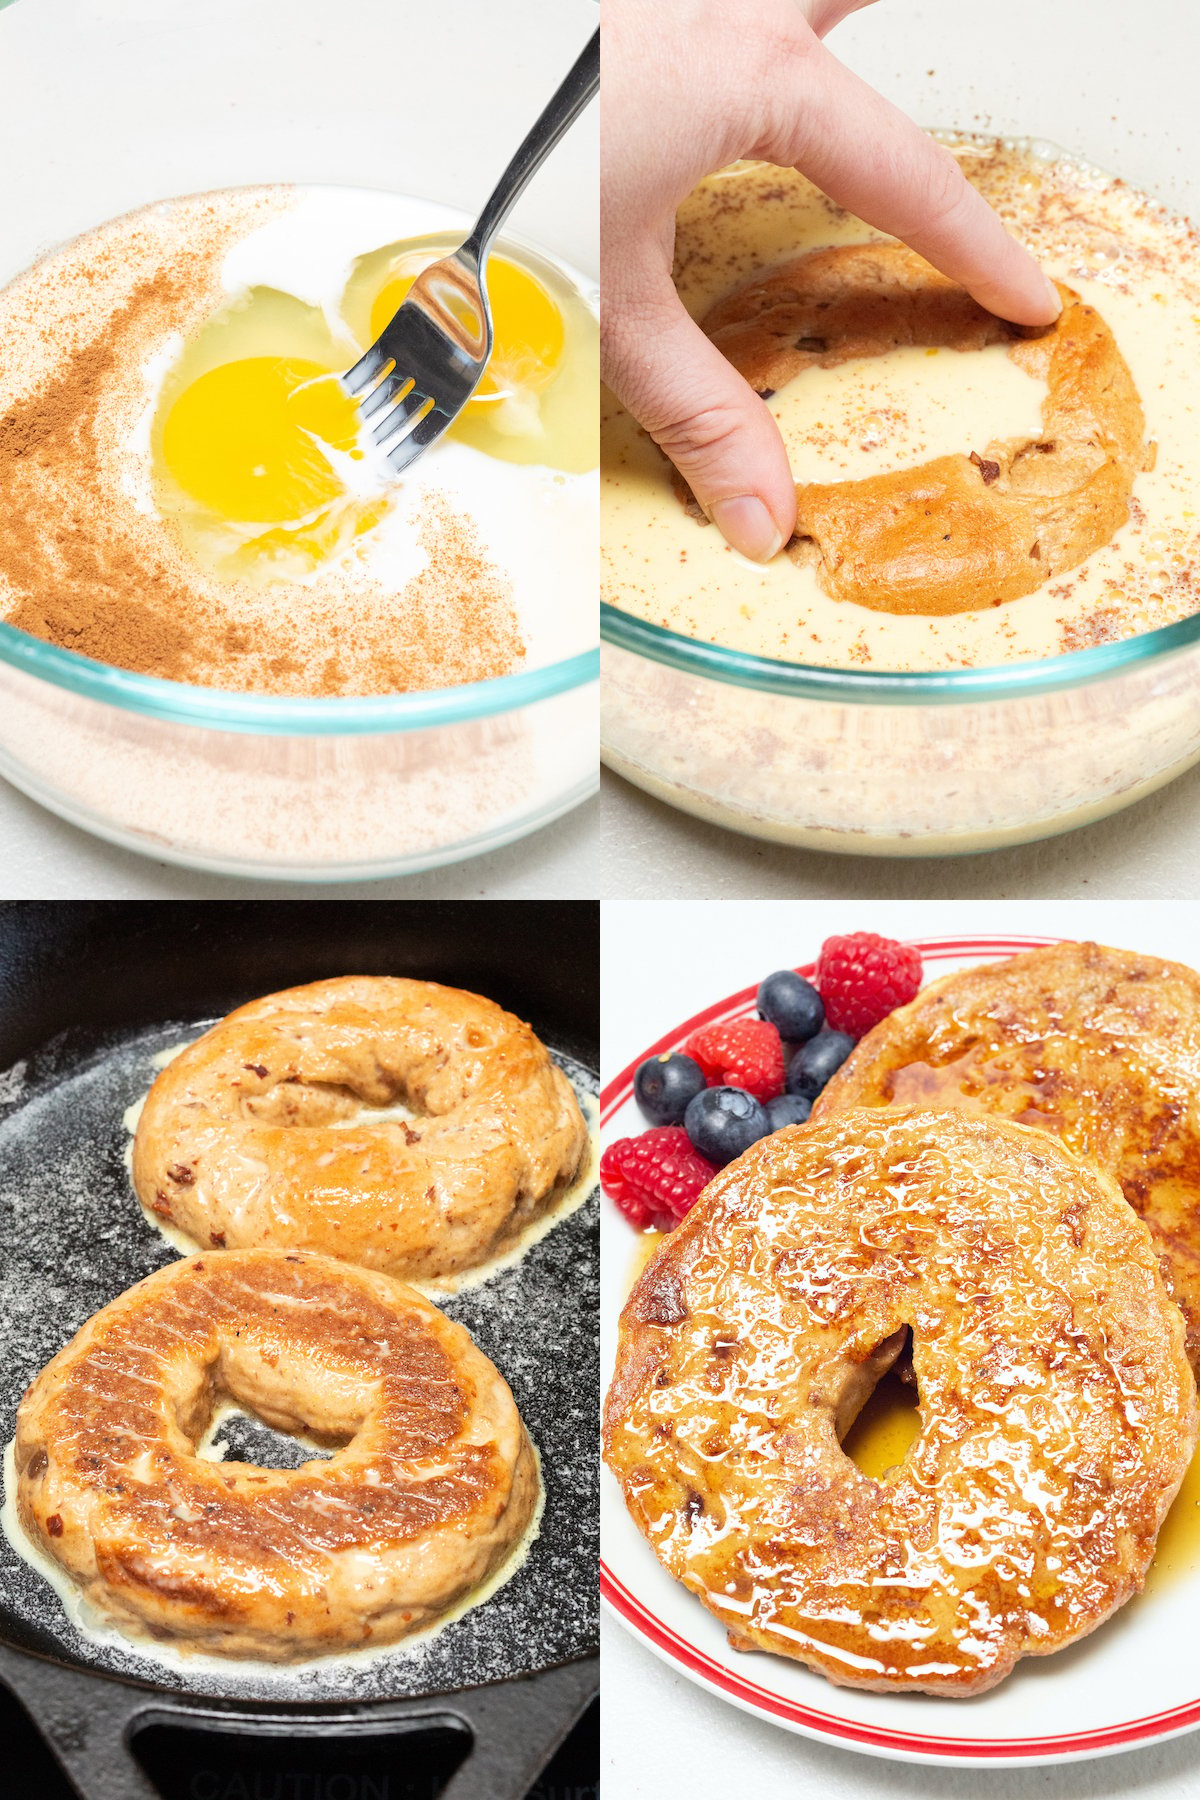 A four image collage showing how to make french toast bagels 1 - combine ingredients in bowl, 2 - dip bagels in bowl, 3 - sear in a pan with butter, 4 - plate with berries and syrup.